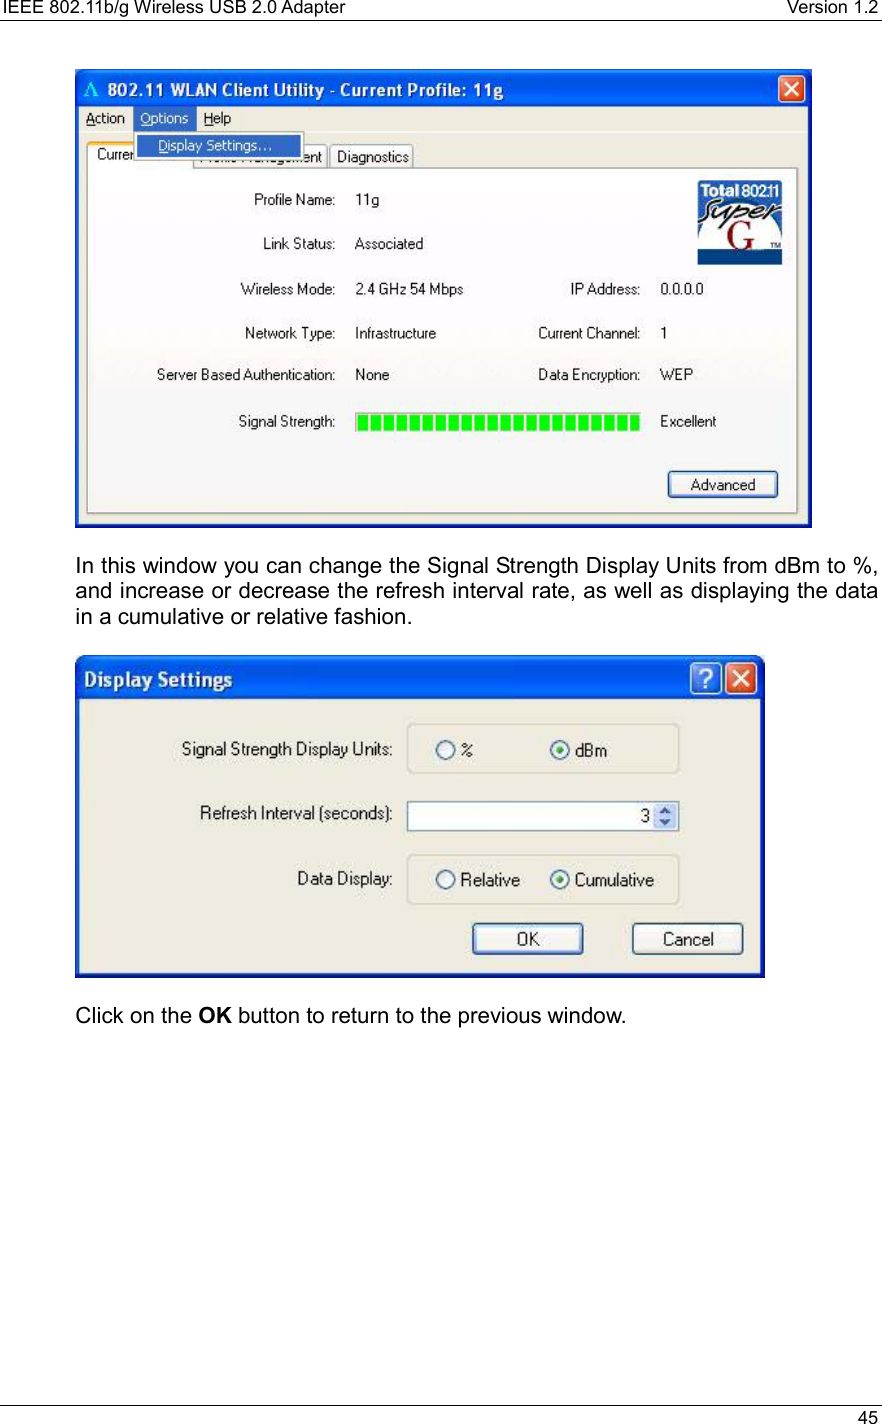 IEEE 802.11b/g Wireless USB 2.0 Adapter    Version 1.2   45     In this window you can change the Signal Strength Display Units from dBm to %, and increase or decrease the refresh interval rate, as well as displaying the data in a cumulative or relative fashion.     Click on the OK button to return to the previous window.    